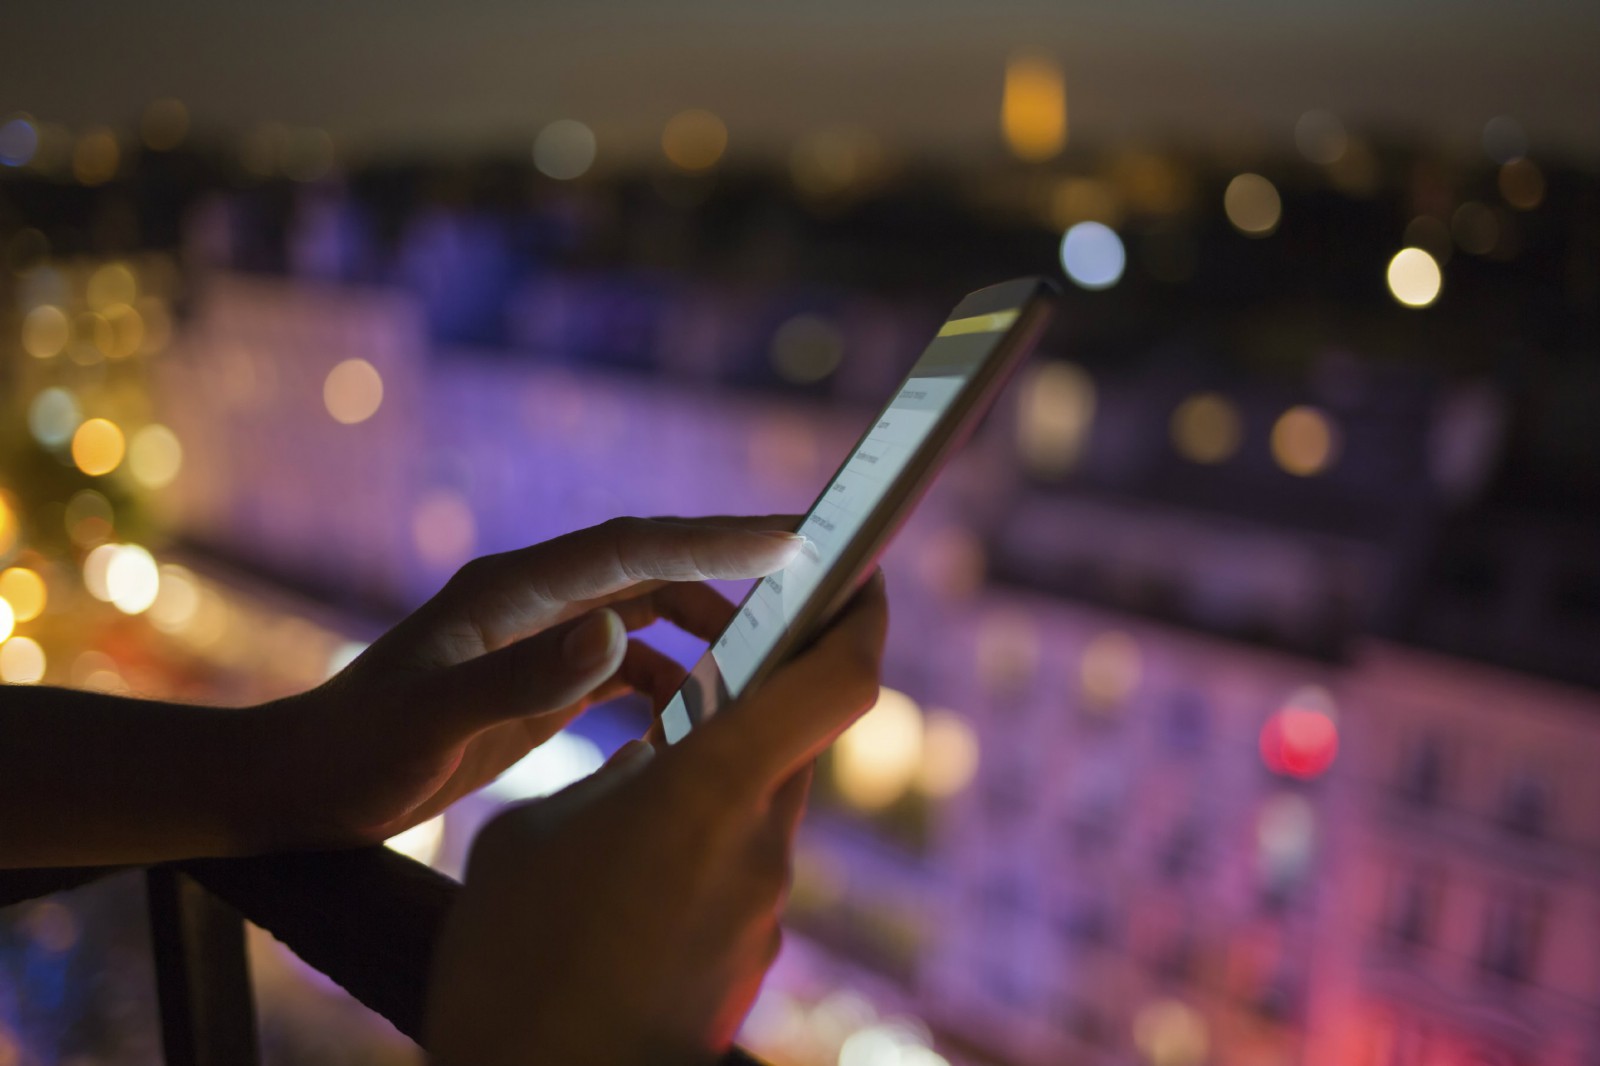 Image of smartphone being used at night.